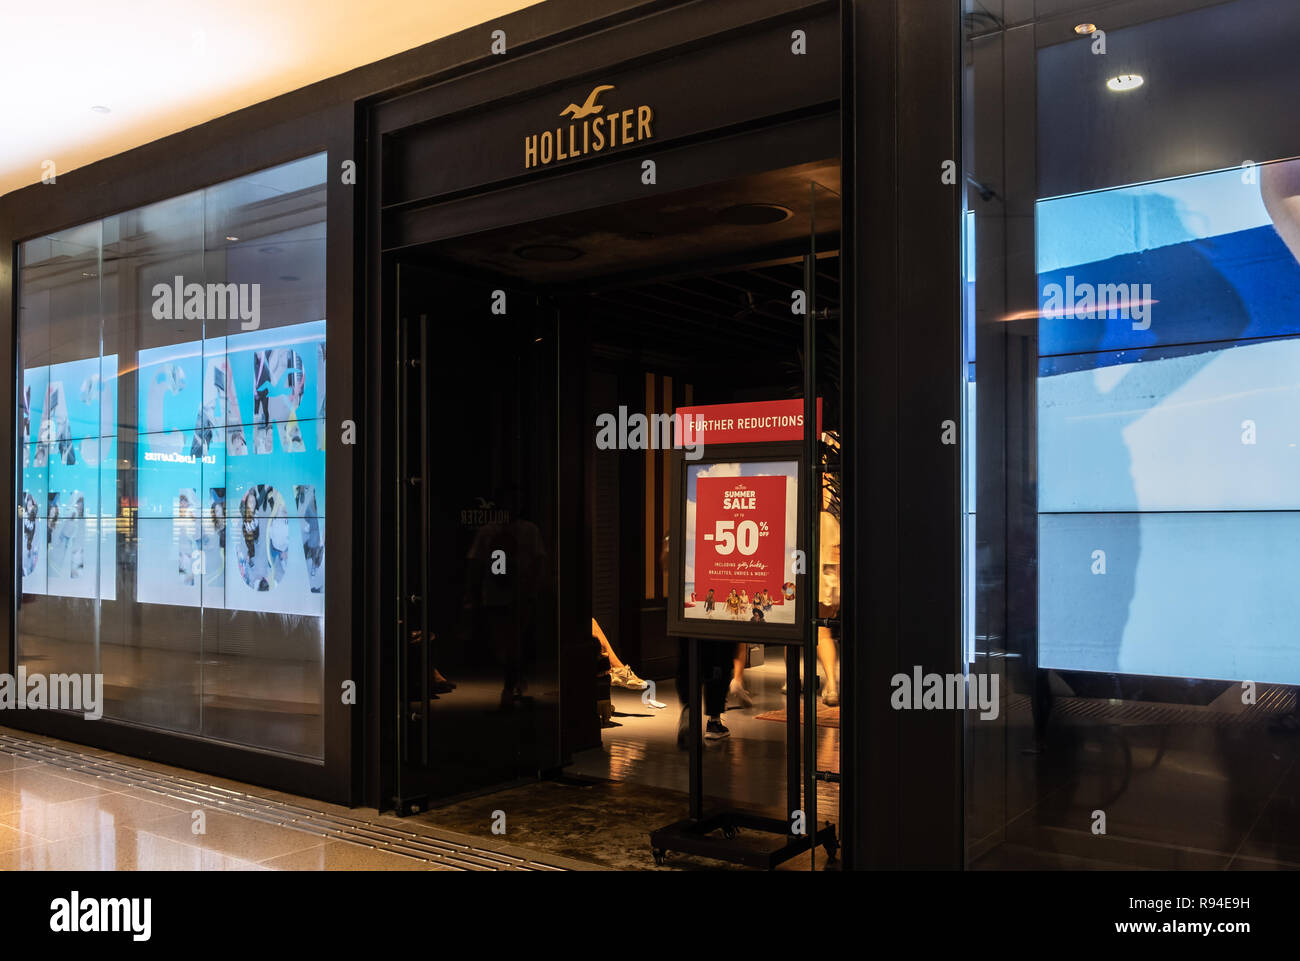 Hong Kong, February 15, 2018: Hollister store in Hong Kong. Hollister Co. is an American lifestyle brand by Abercrombie & Fitch Company. Stock Photo